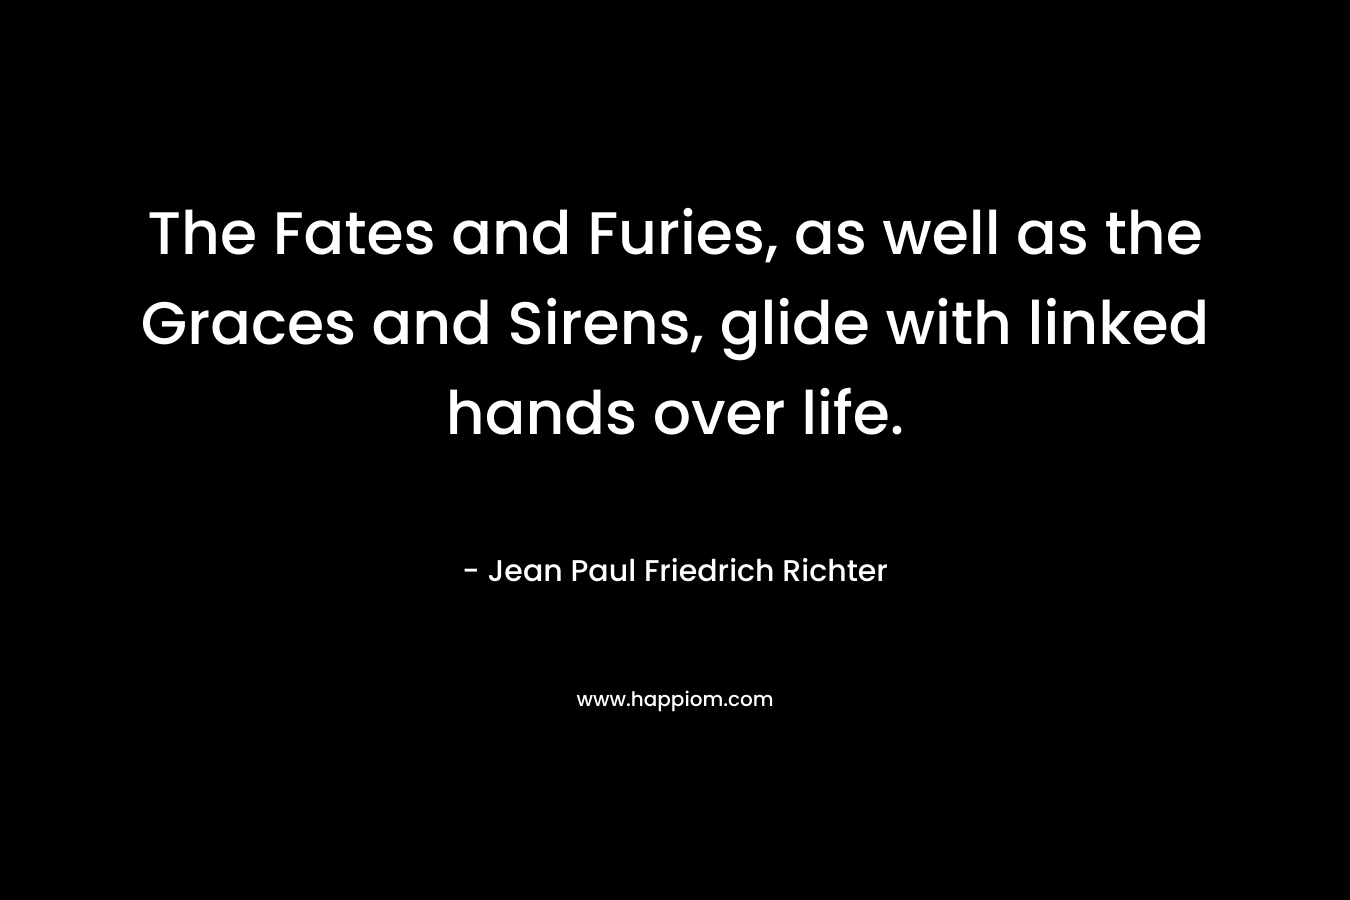 The Fates and Furies, as well as the Graces and Sirens, glide with linked hands over life.